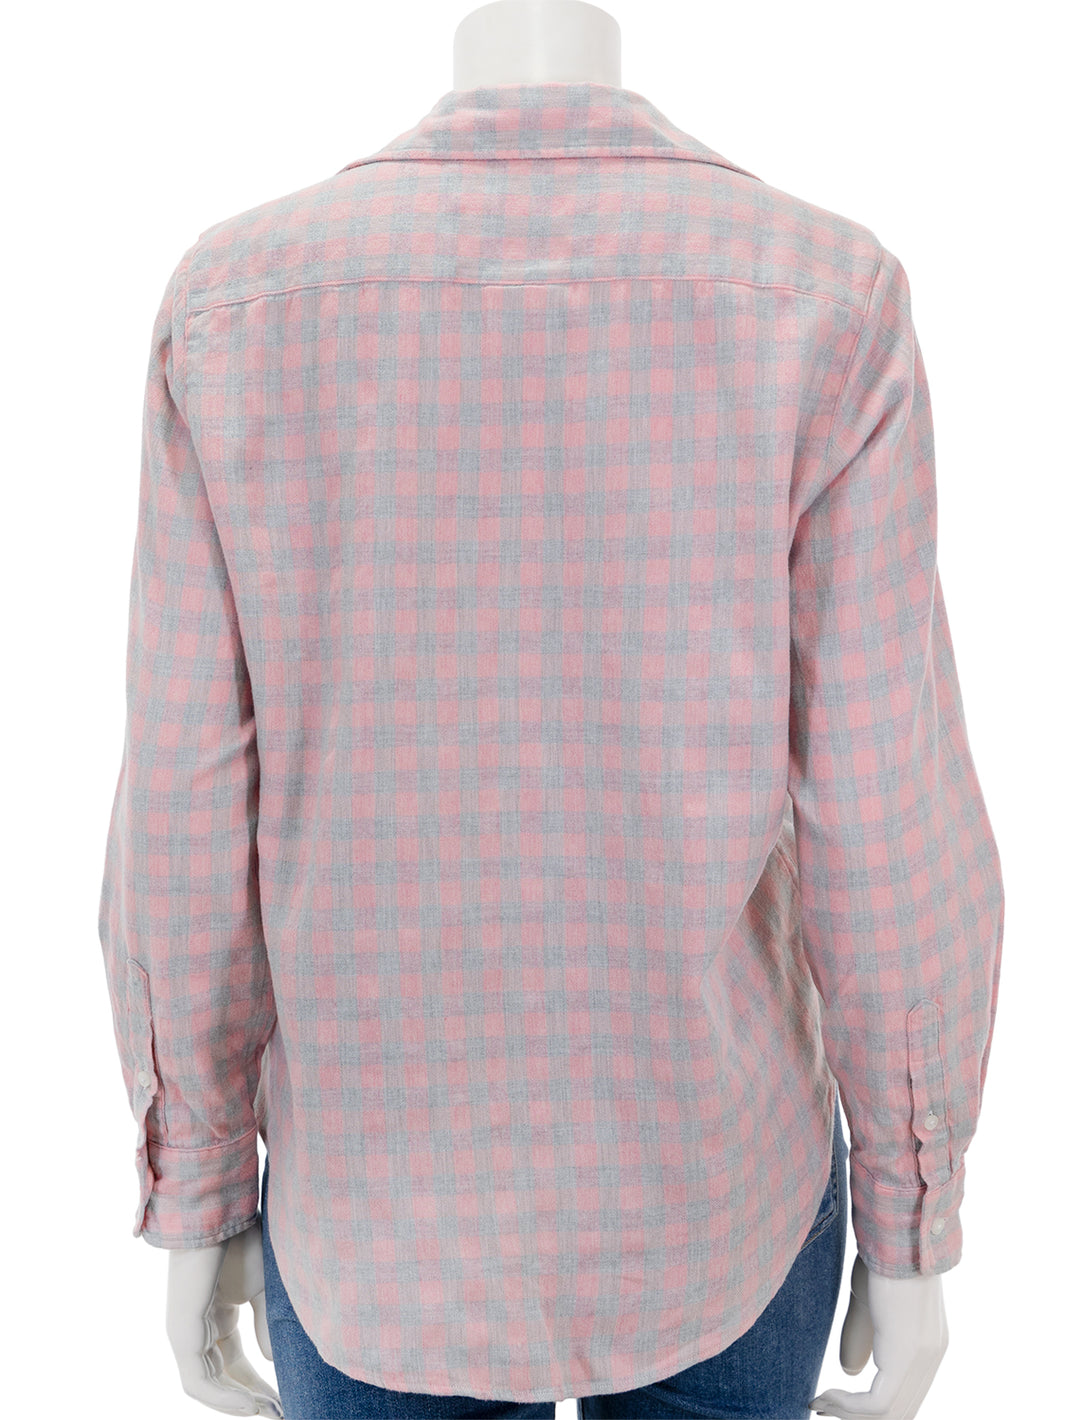 Back view of Frank & Eileen's eileen in grey and pink check flannel.